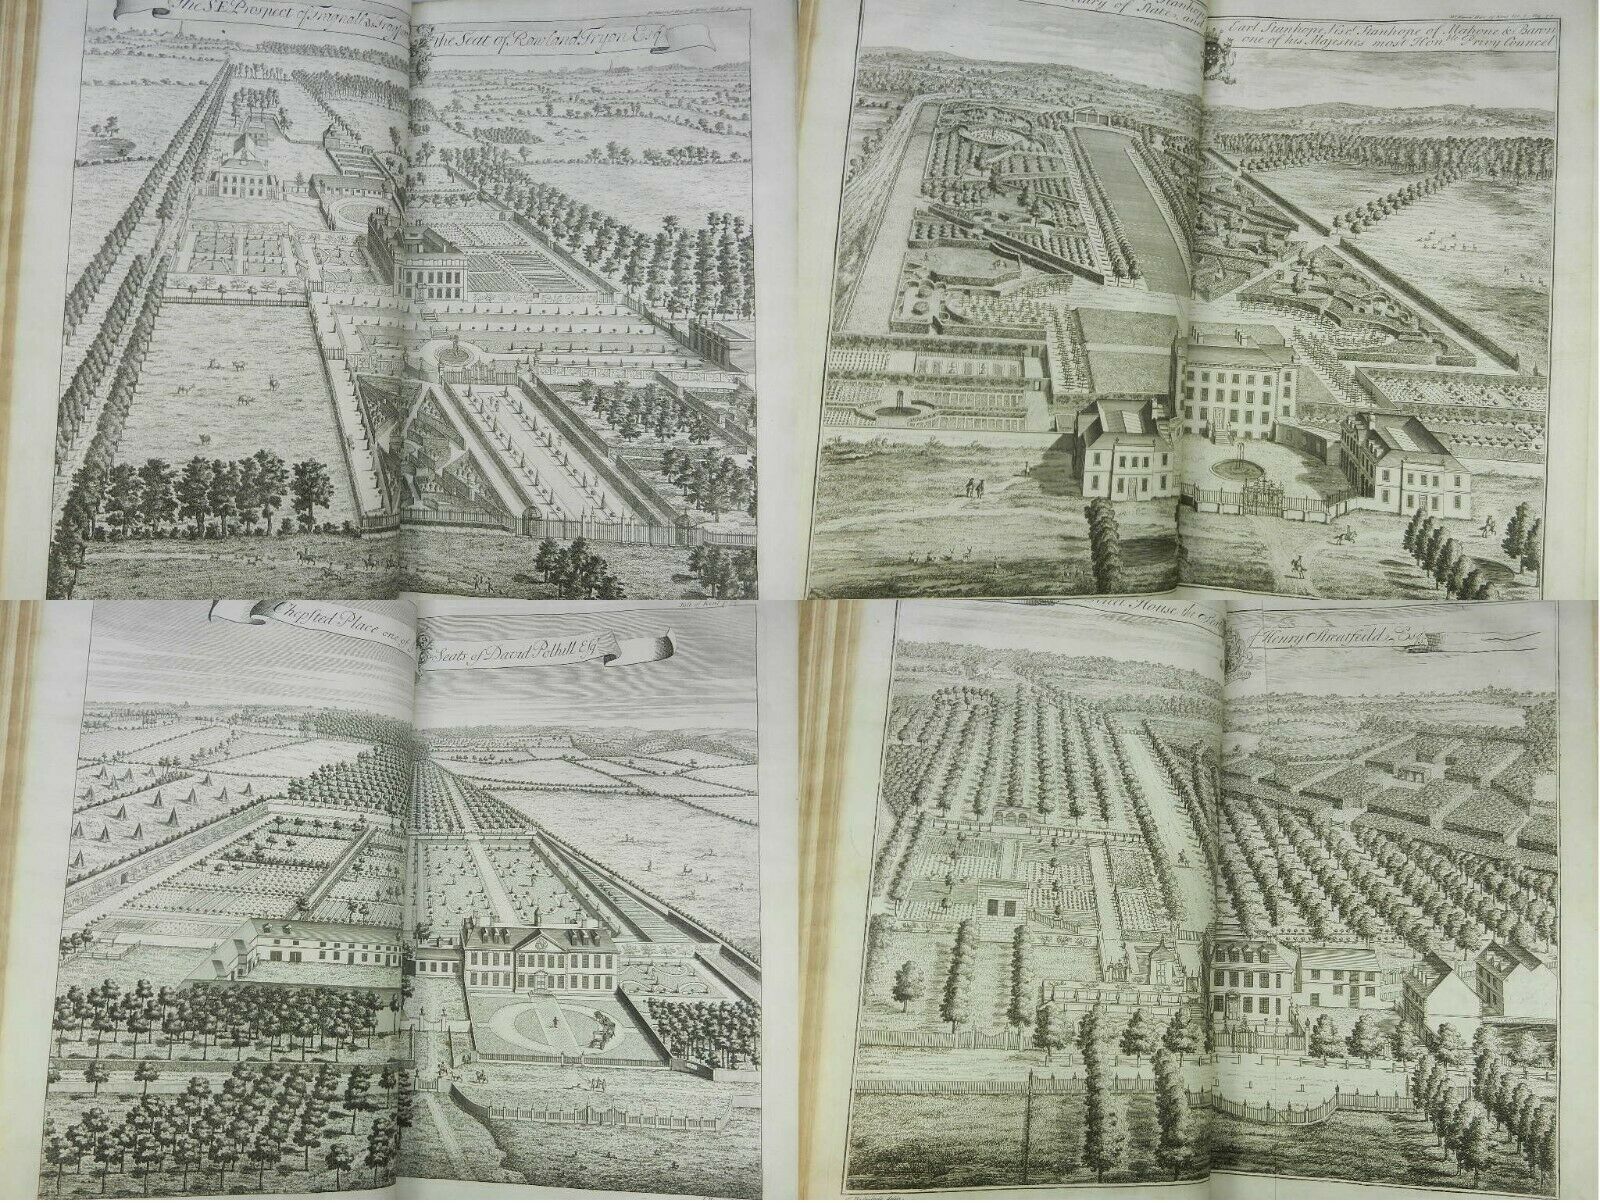 THE HISTORY OF KENT BY JOHN HARRIS 1719 First Edition, 43 Fine Engraved Plates